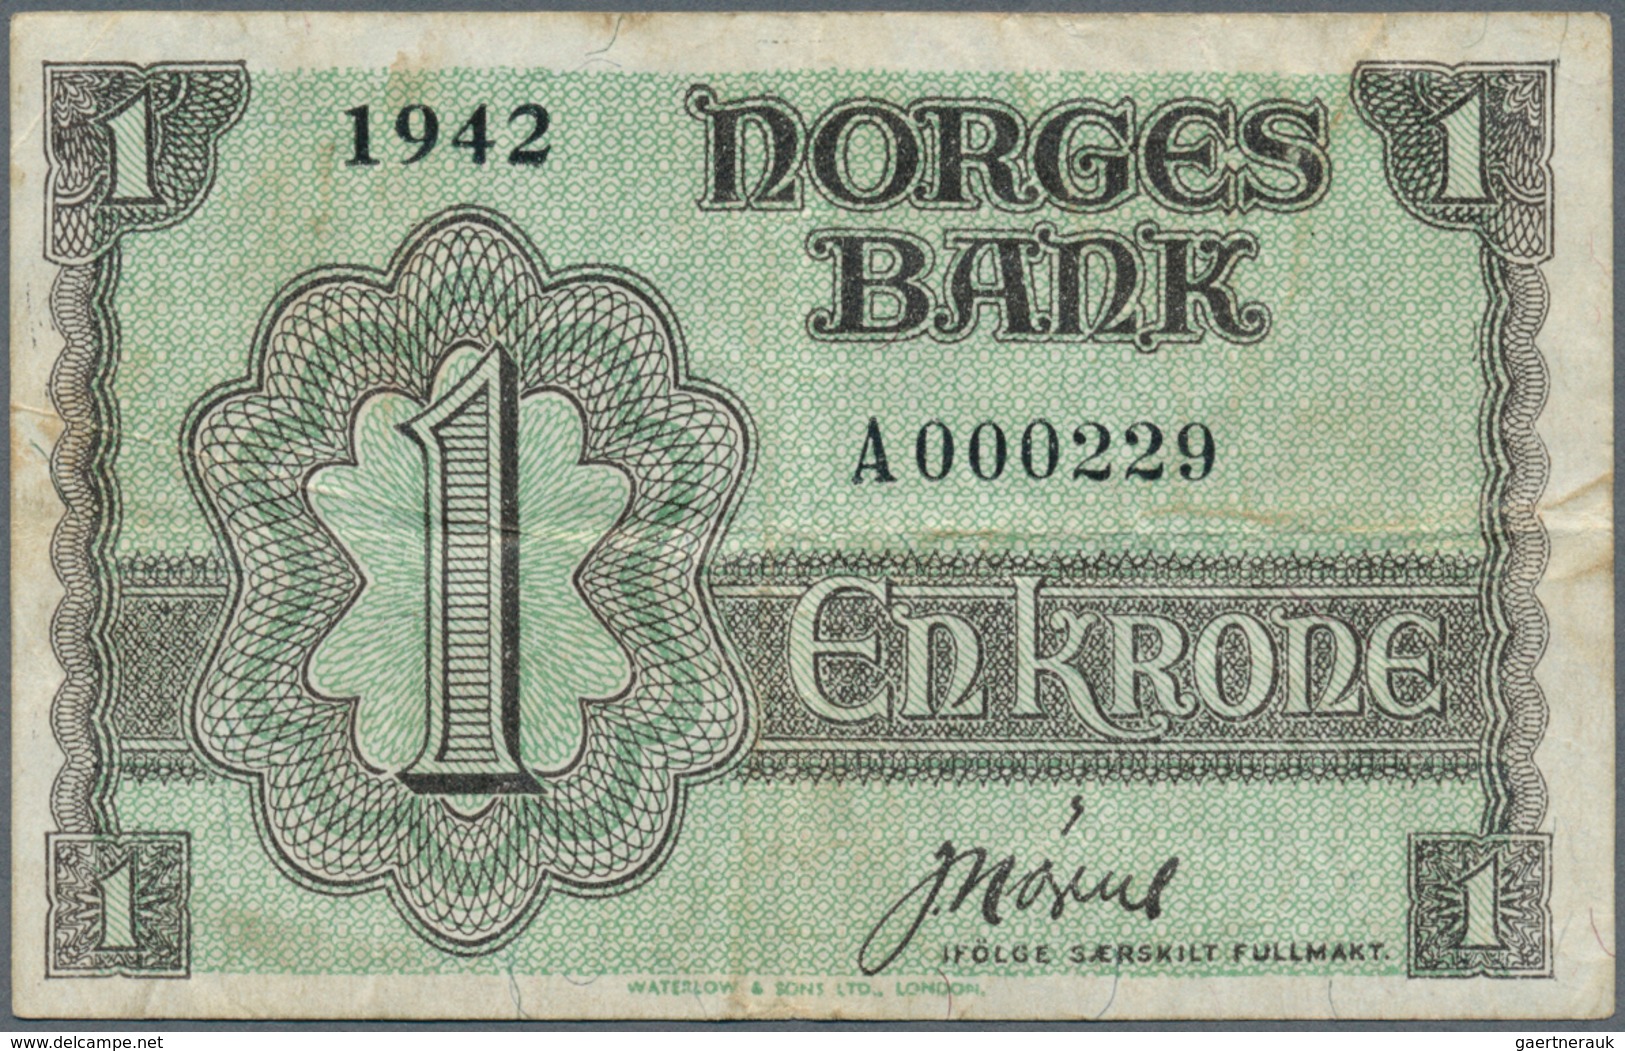 Norway / Norwegen: 1 Krone 1942 P. 17a With Very Low Serial Number #A000229, So This Note Was The 22 - Noruega